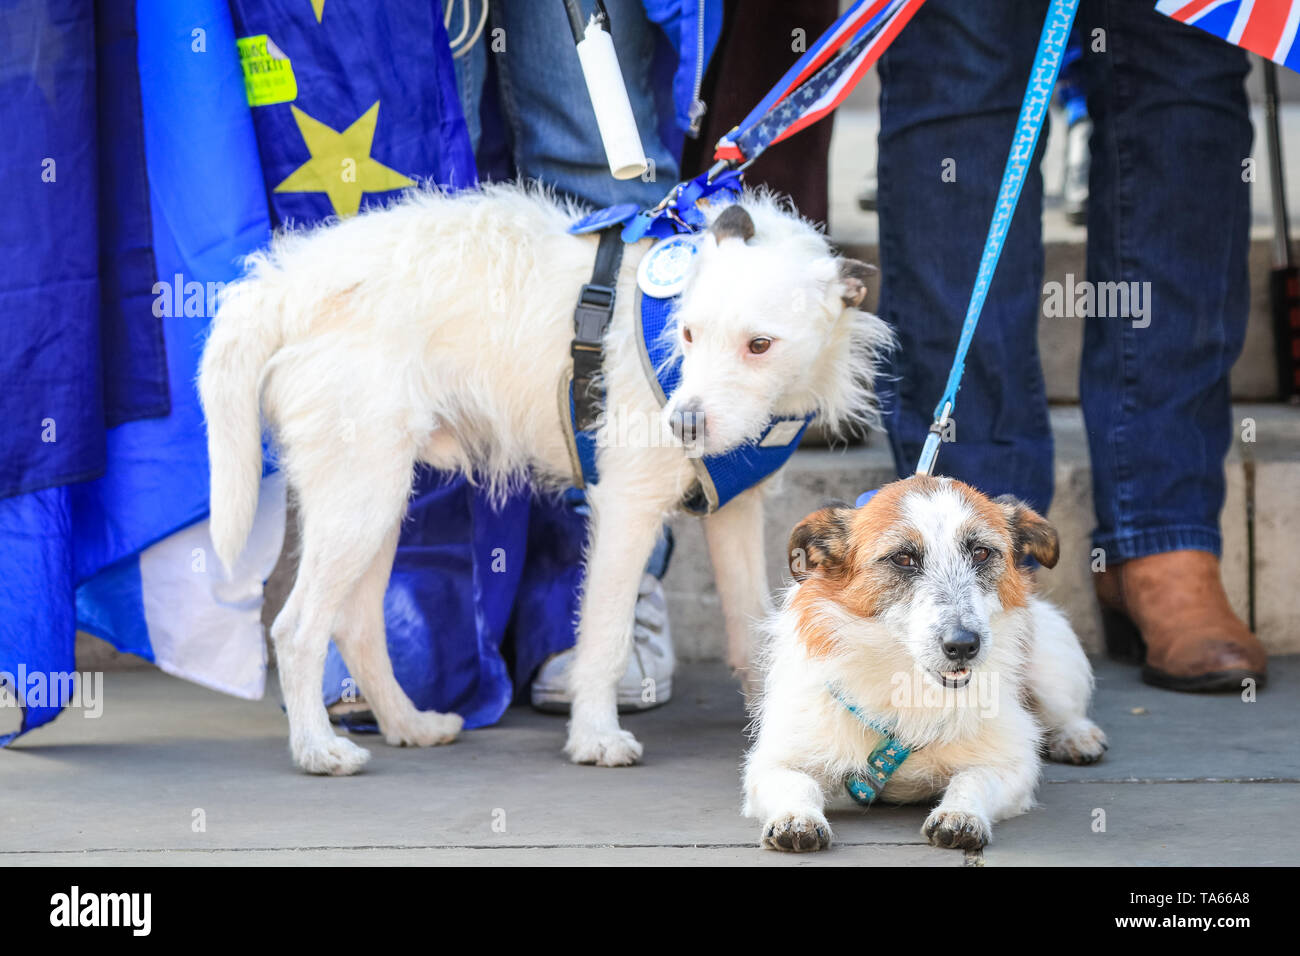 Westminster, London, UK, 22nd May 2019. Two Pro-European pooches join in with the protesters. Anti Brexit protesters outside Parliament get together for a 'Stop Brexit' shout out with placards, banners and Stop Brexit signs. Protesters have come from different groups, including Steve Bray, founder of SODEM (Stand of Defiance European Movement), knwon as Westminster's 'Mr. Shouty Man'. Credit: Imageplotter/Alamy Live News Stock Photo